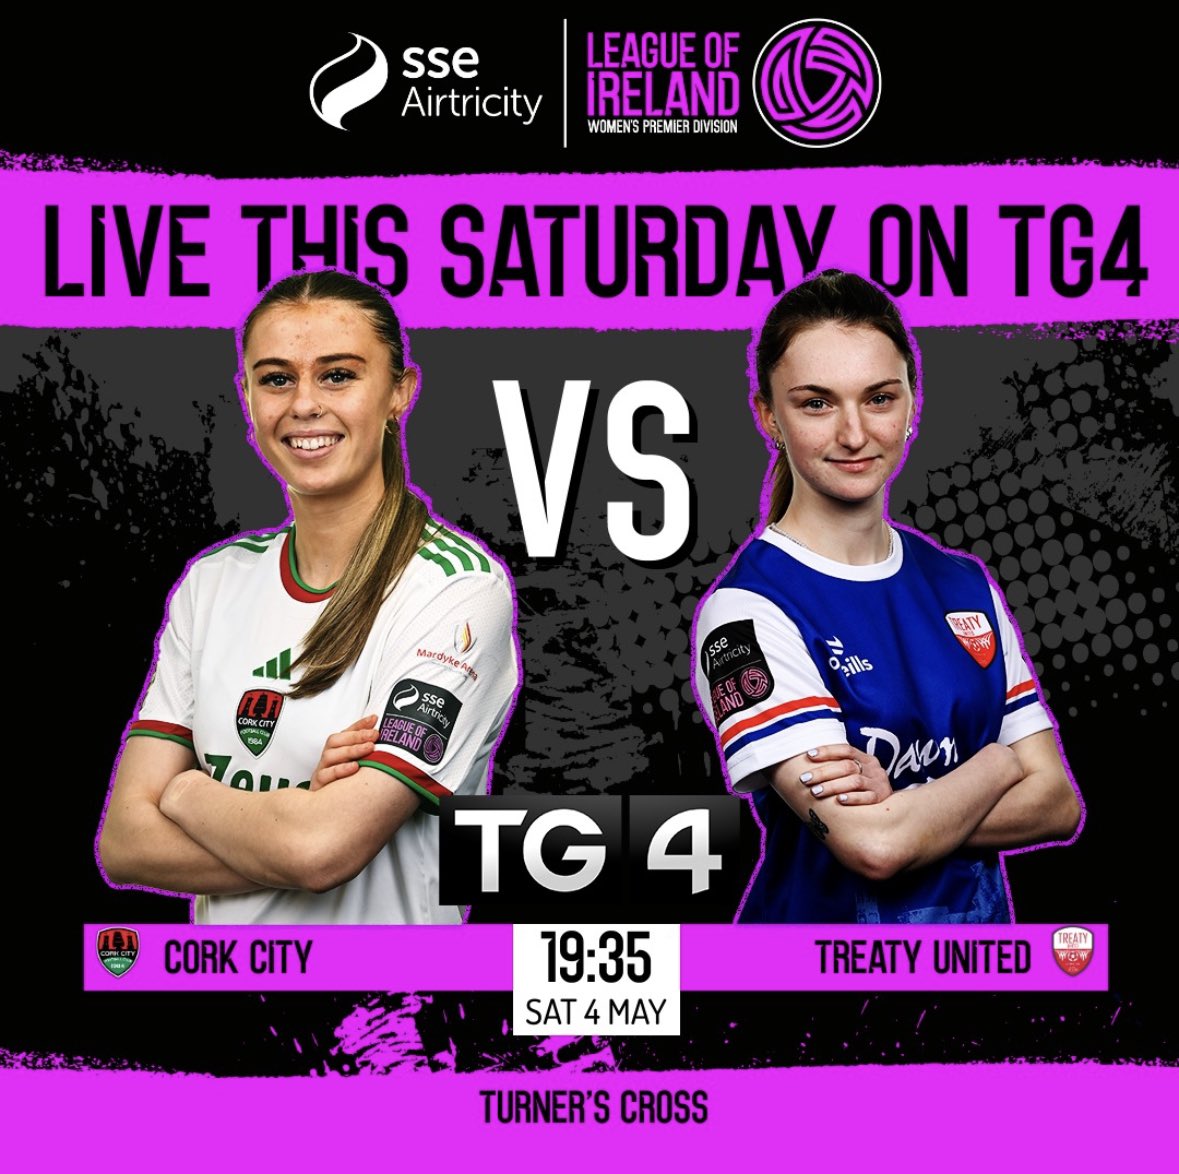 One not to be missed this weekend on @SportTG4 👊 Cork City v Treaty United, 19:35 on TG4 📺 #WLOI | #CORTRE